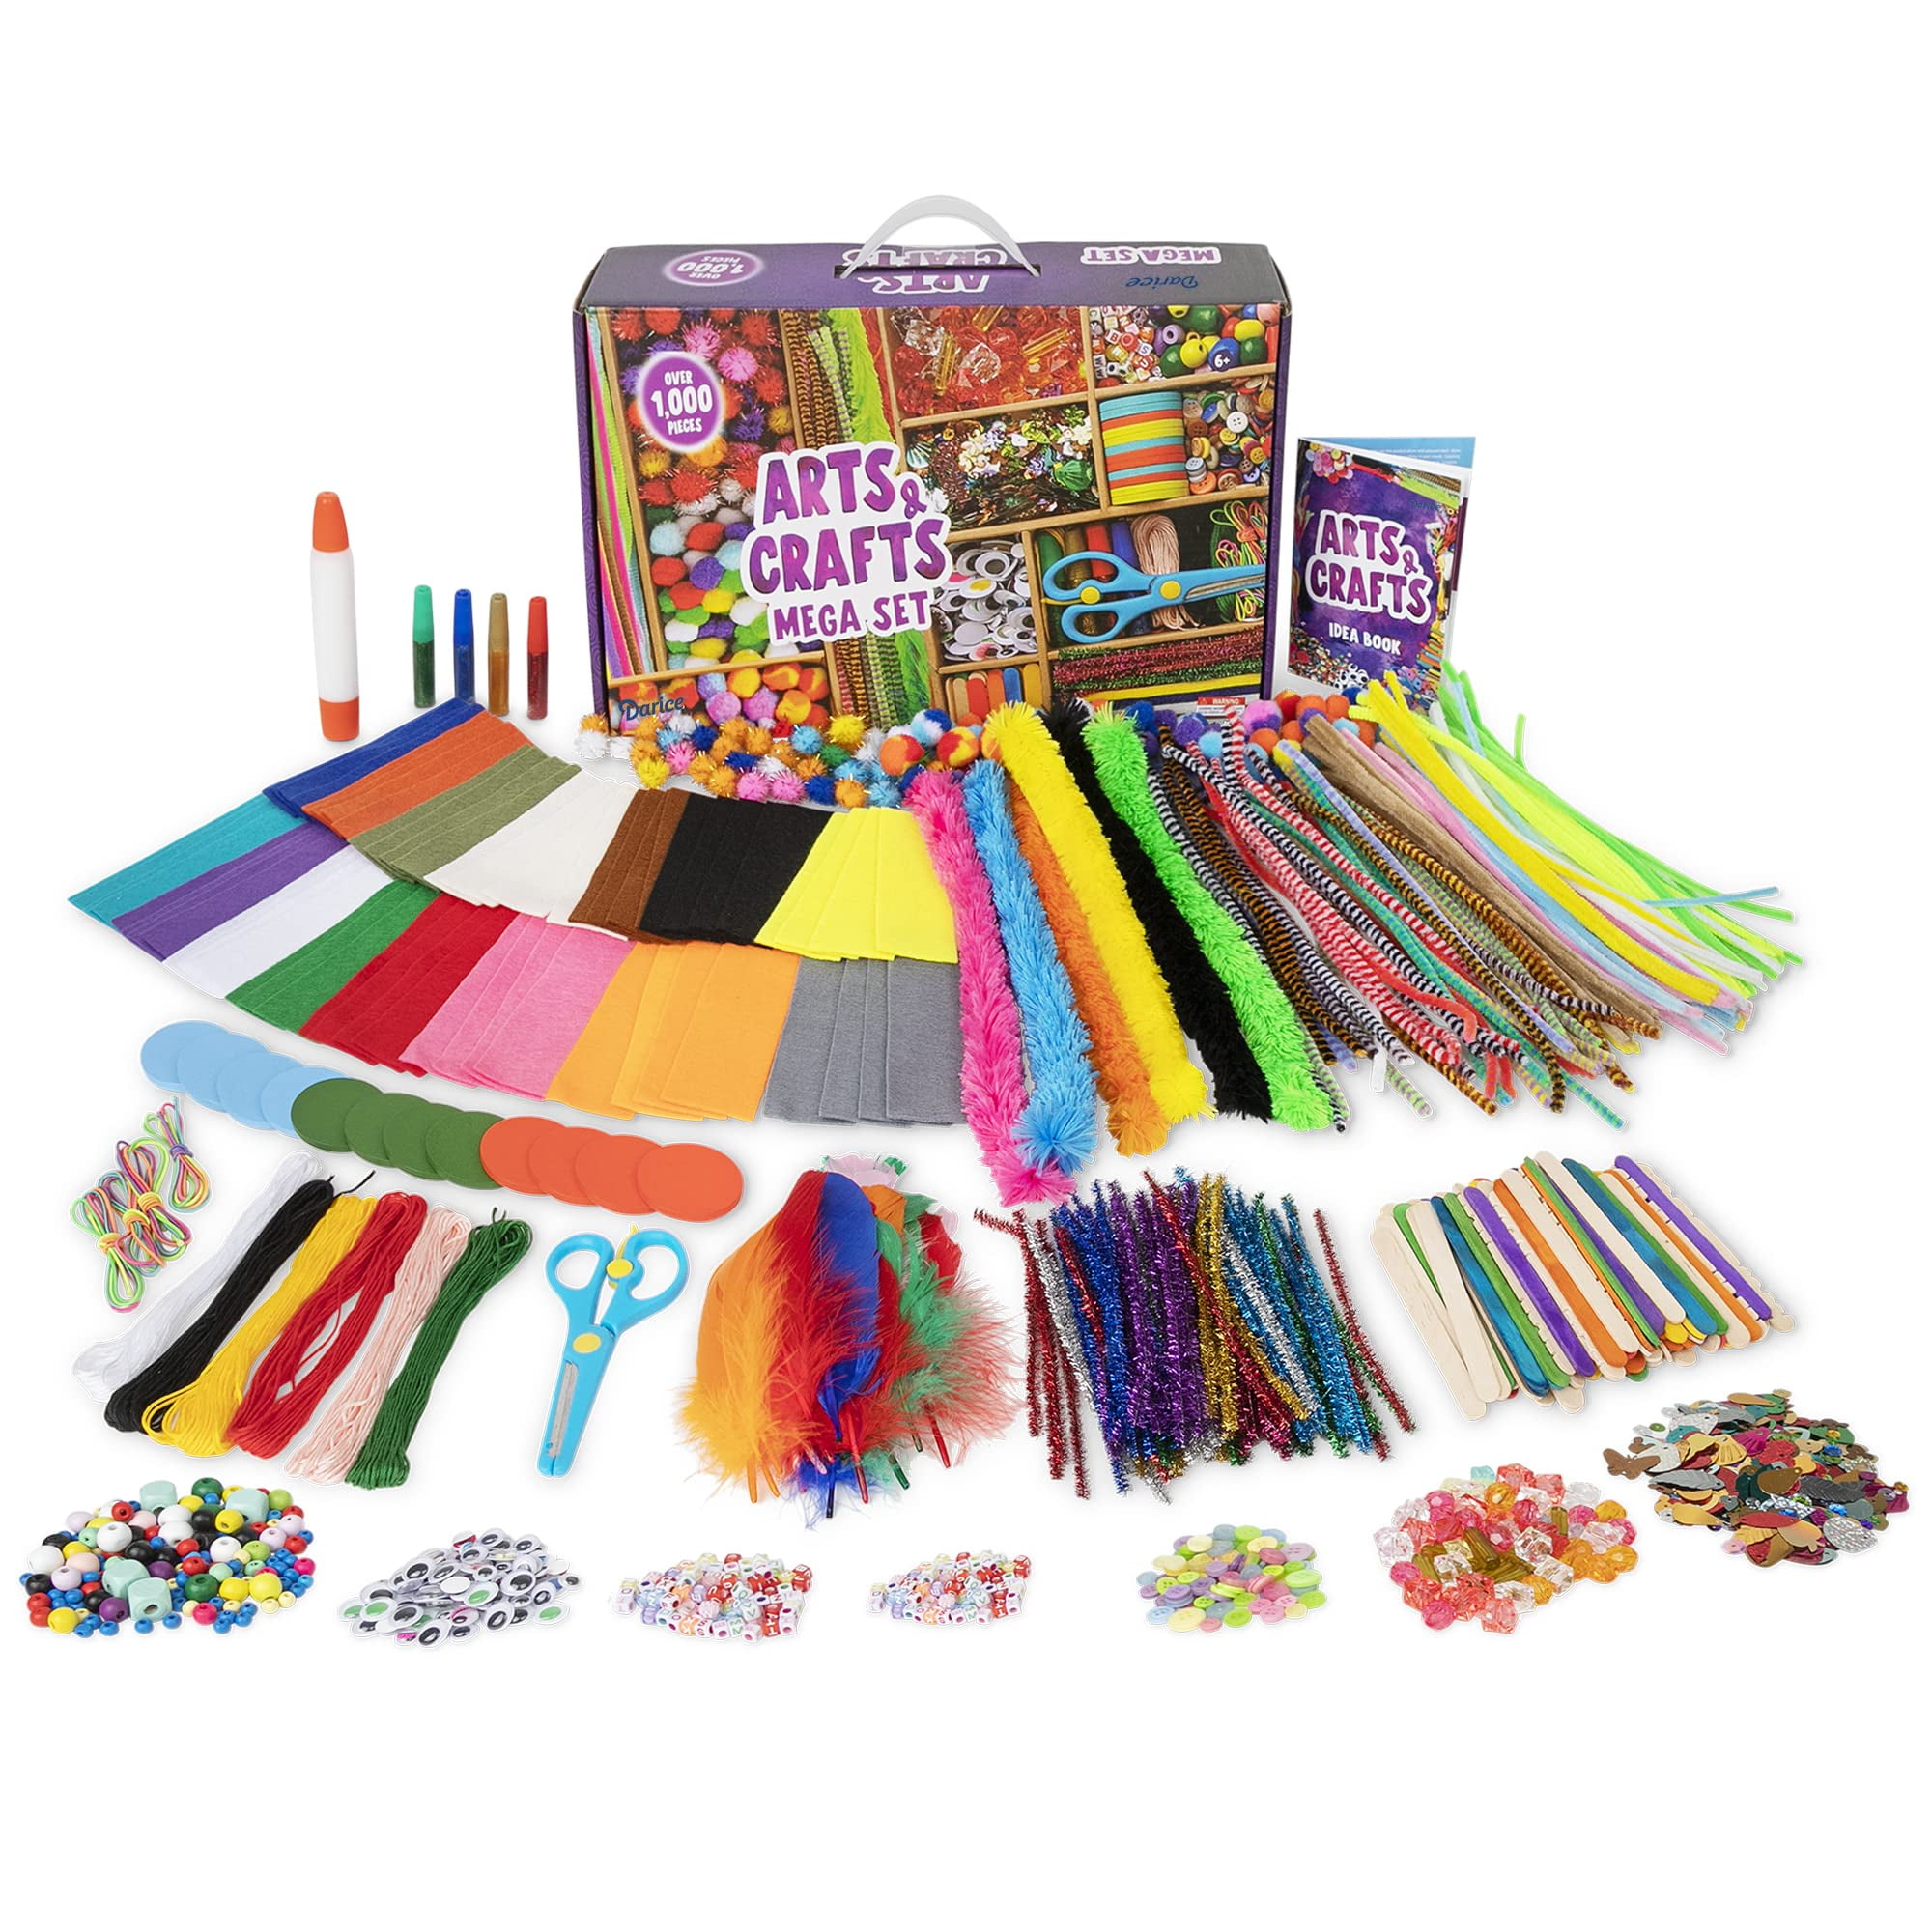 Dylan & Rylie Kids Arts & Crafts Kit - 1000+ Piece Creative Supplies Set  for Ages 4-12, Ideal for Fun & Learning